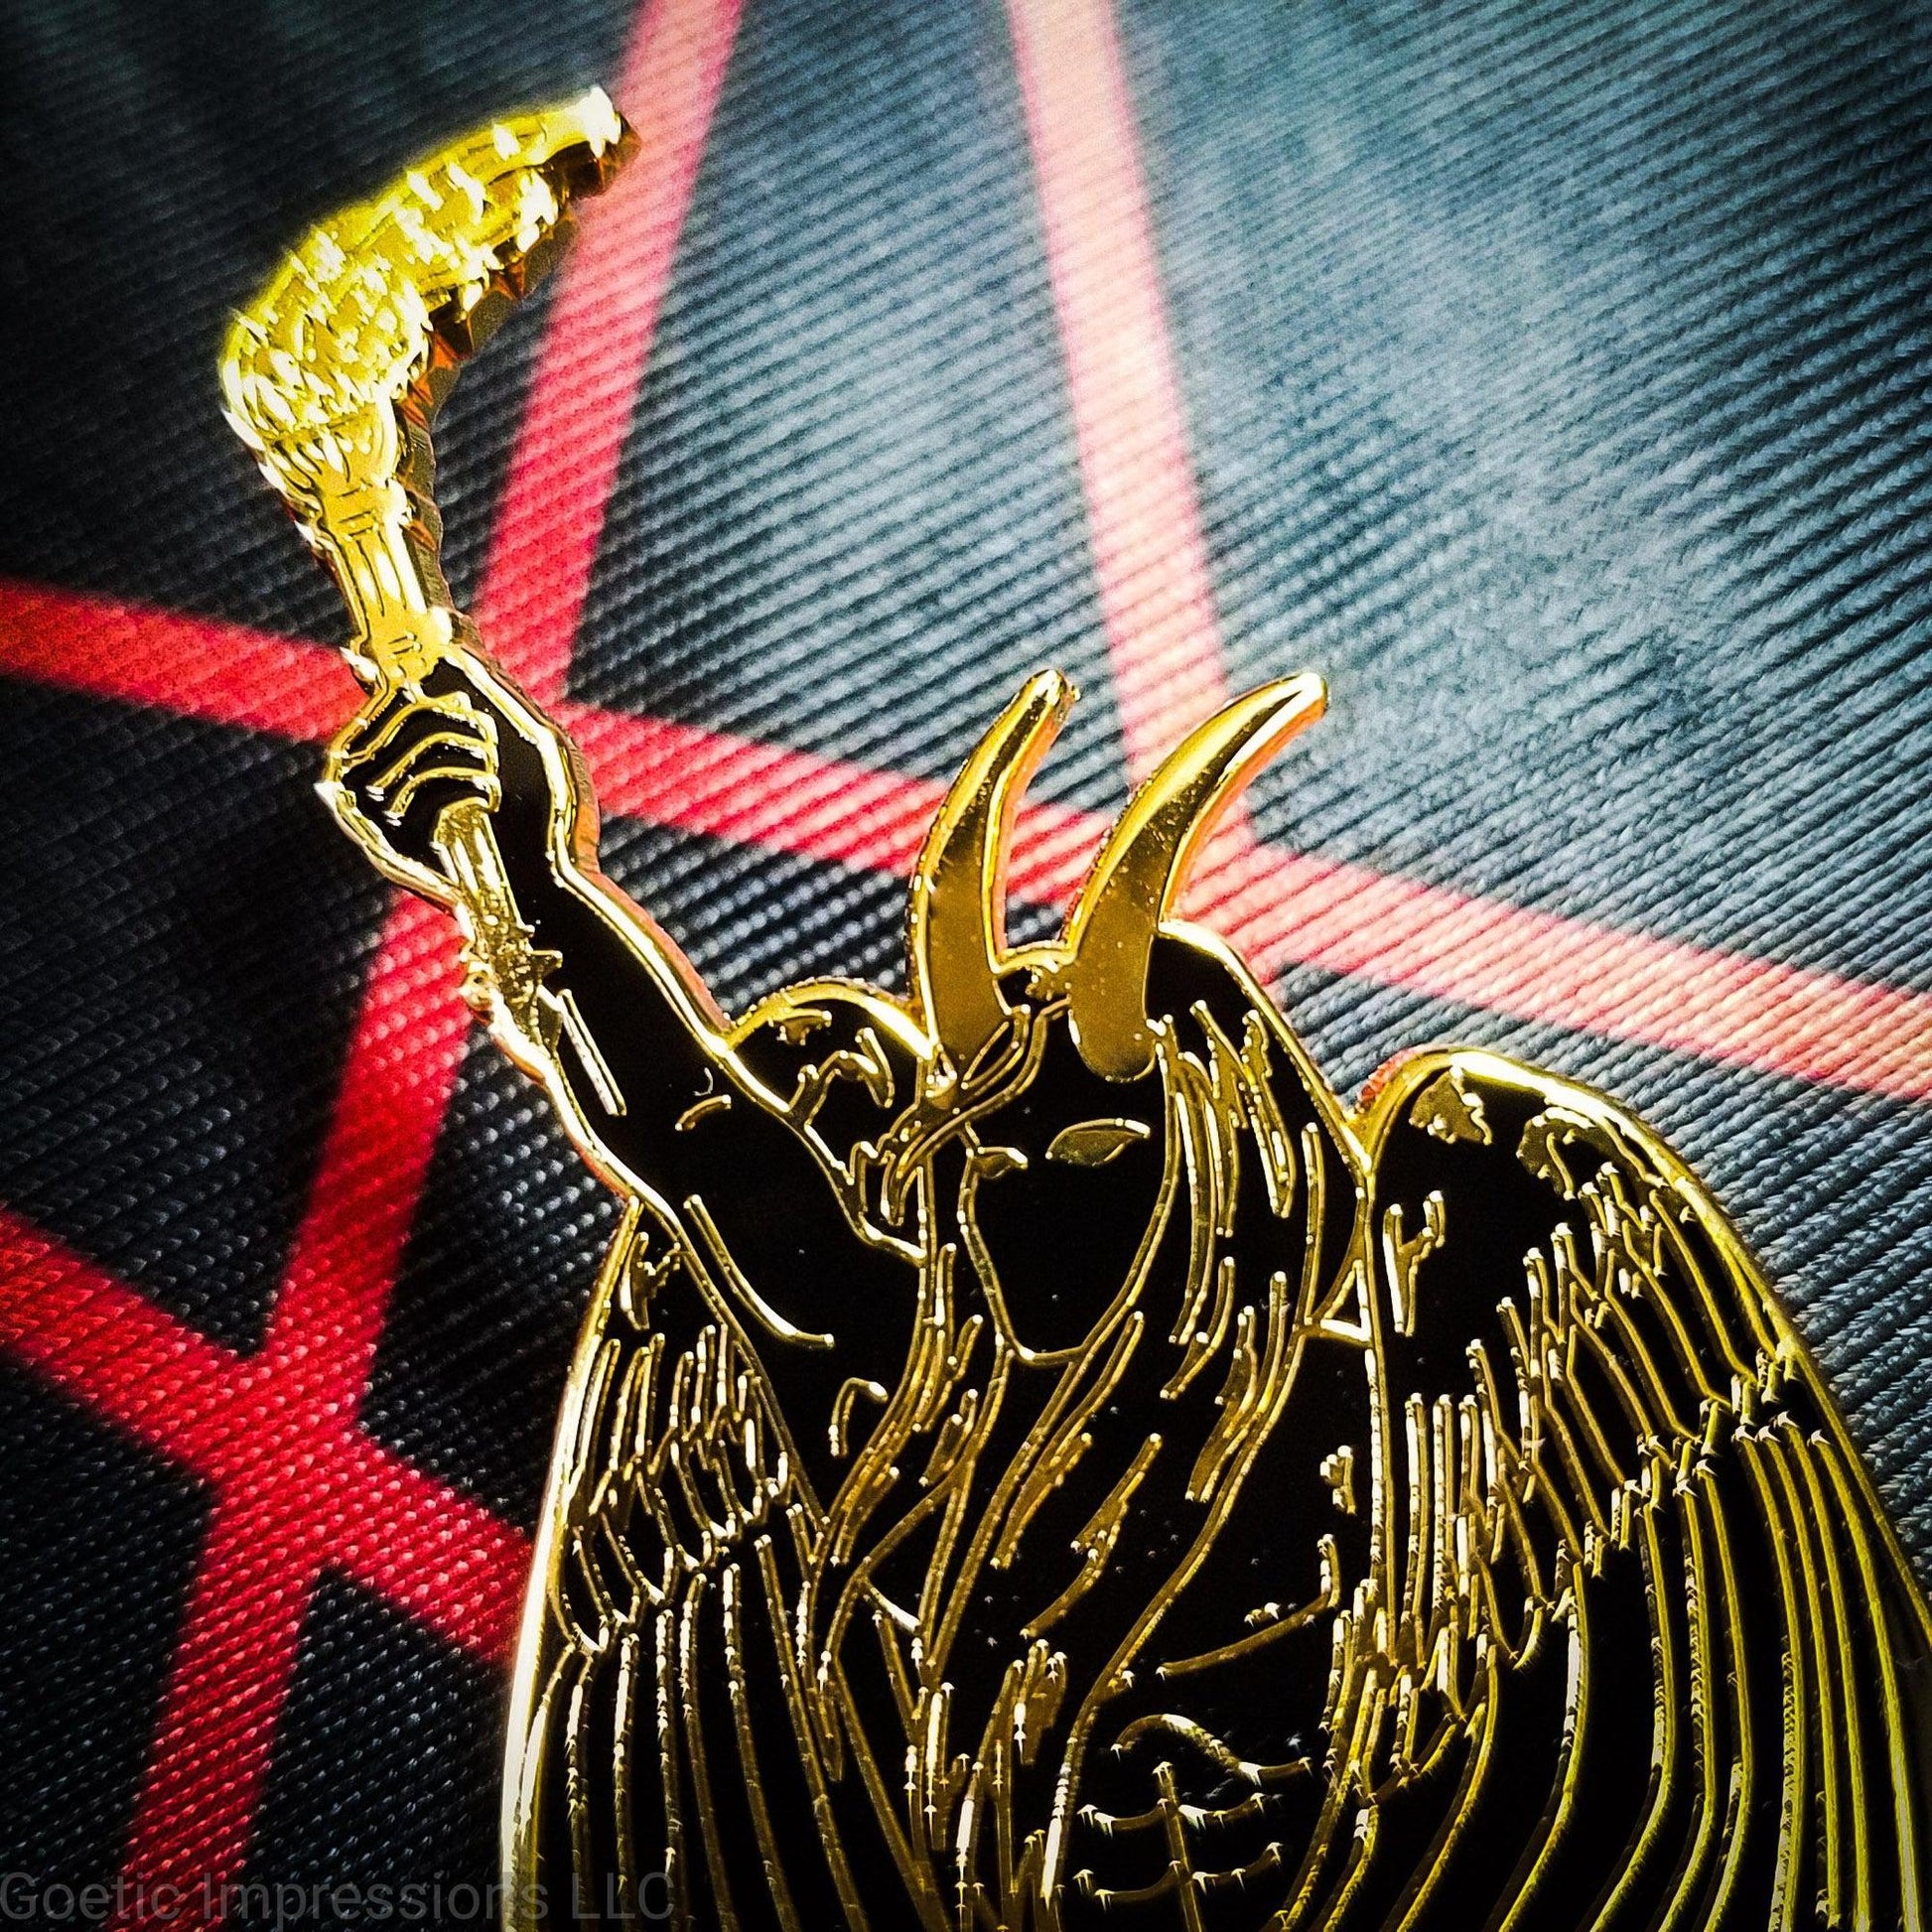 A black and gold hard enamel pin of Lucifer. Lucifer is holding a flaming torch held high and has his wings surrounding him. He has horns and is bare chested. The pin is on a red and black altar cloth with Lucifer's sigil on it. 